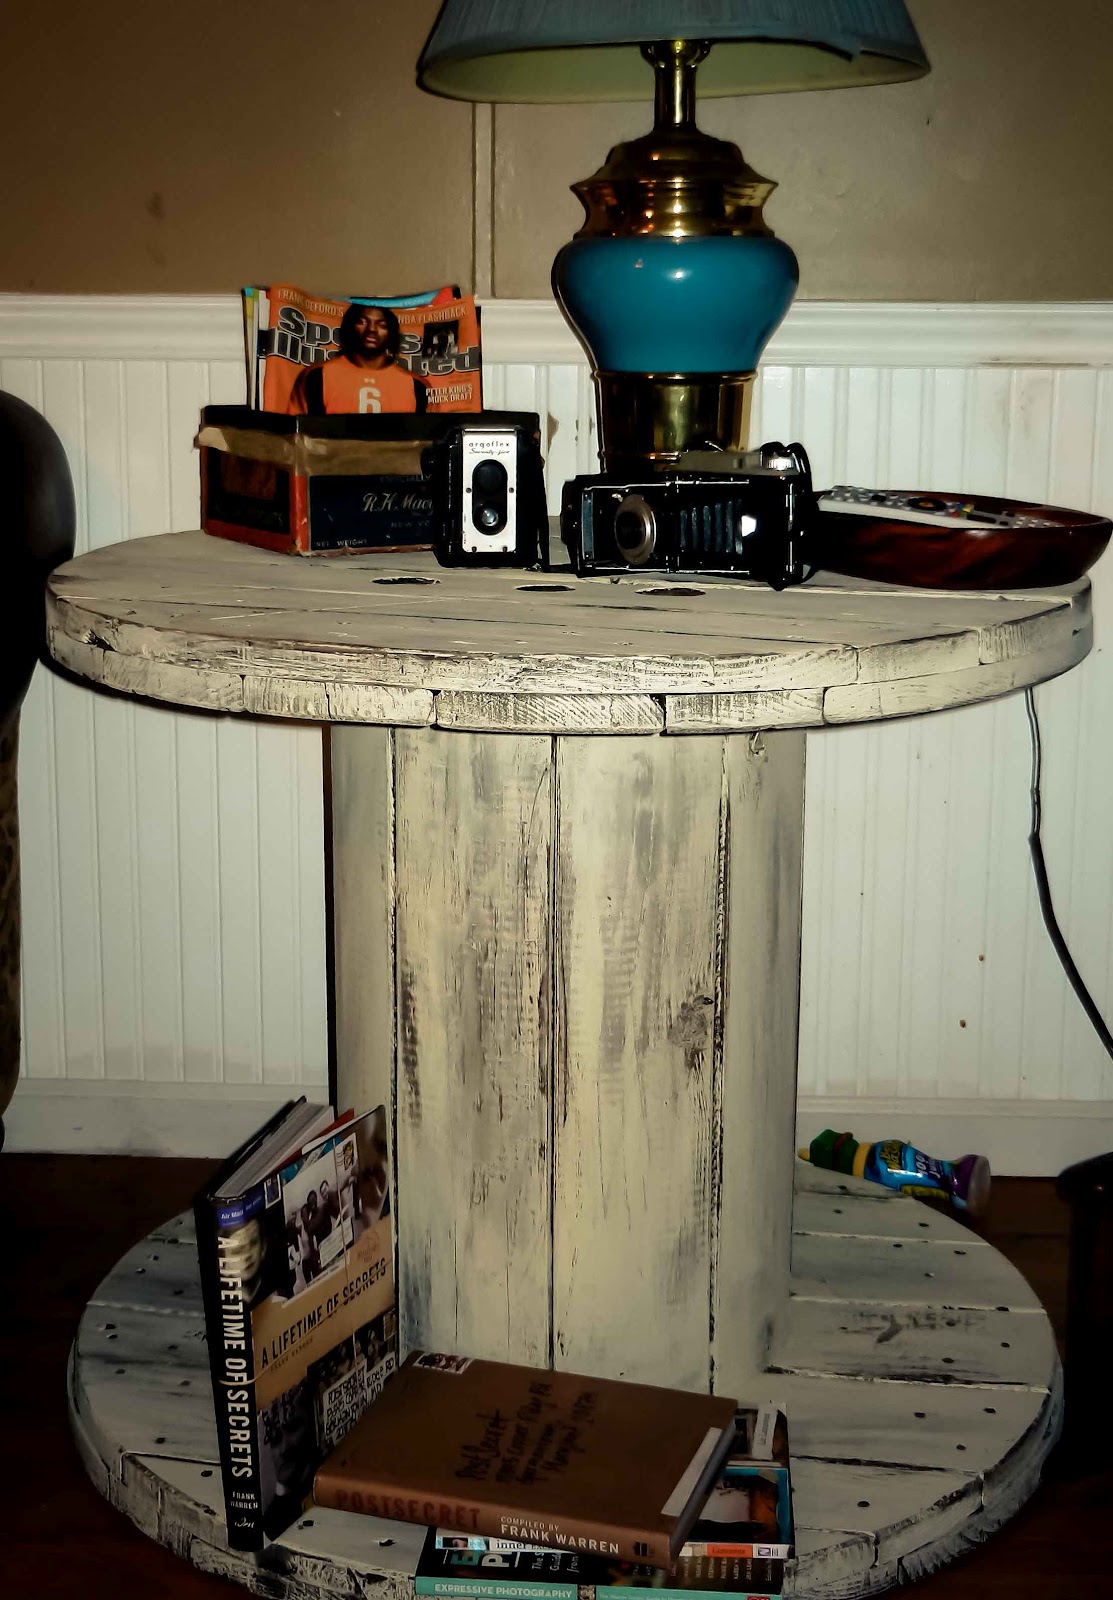 Artistic Icing: Wooden Spool End Table ... my latest DIY idea from Pinterest